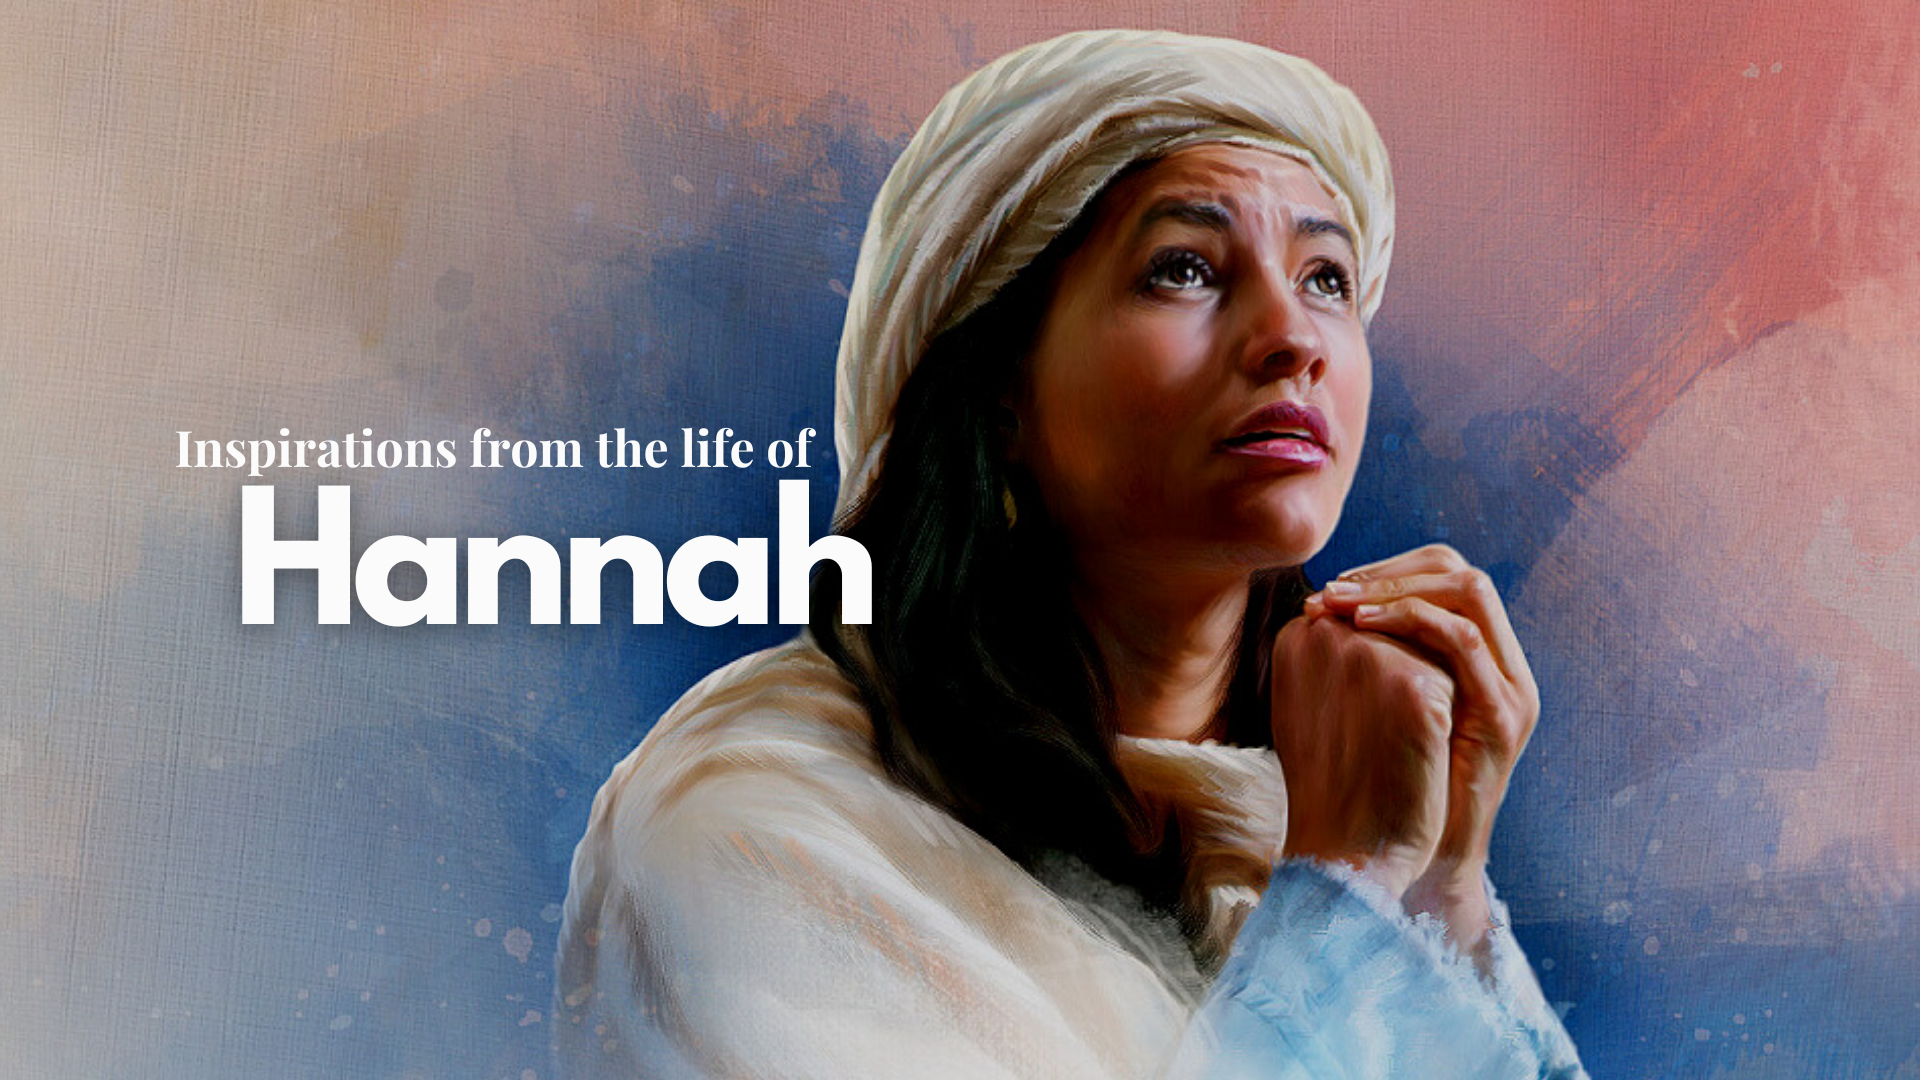 Hannah, one of the women Bible characters that inspires
